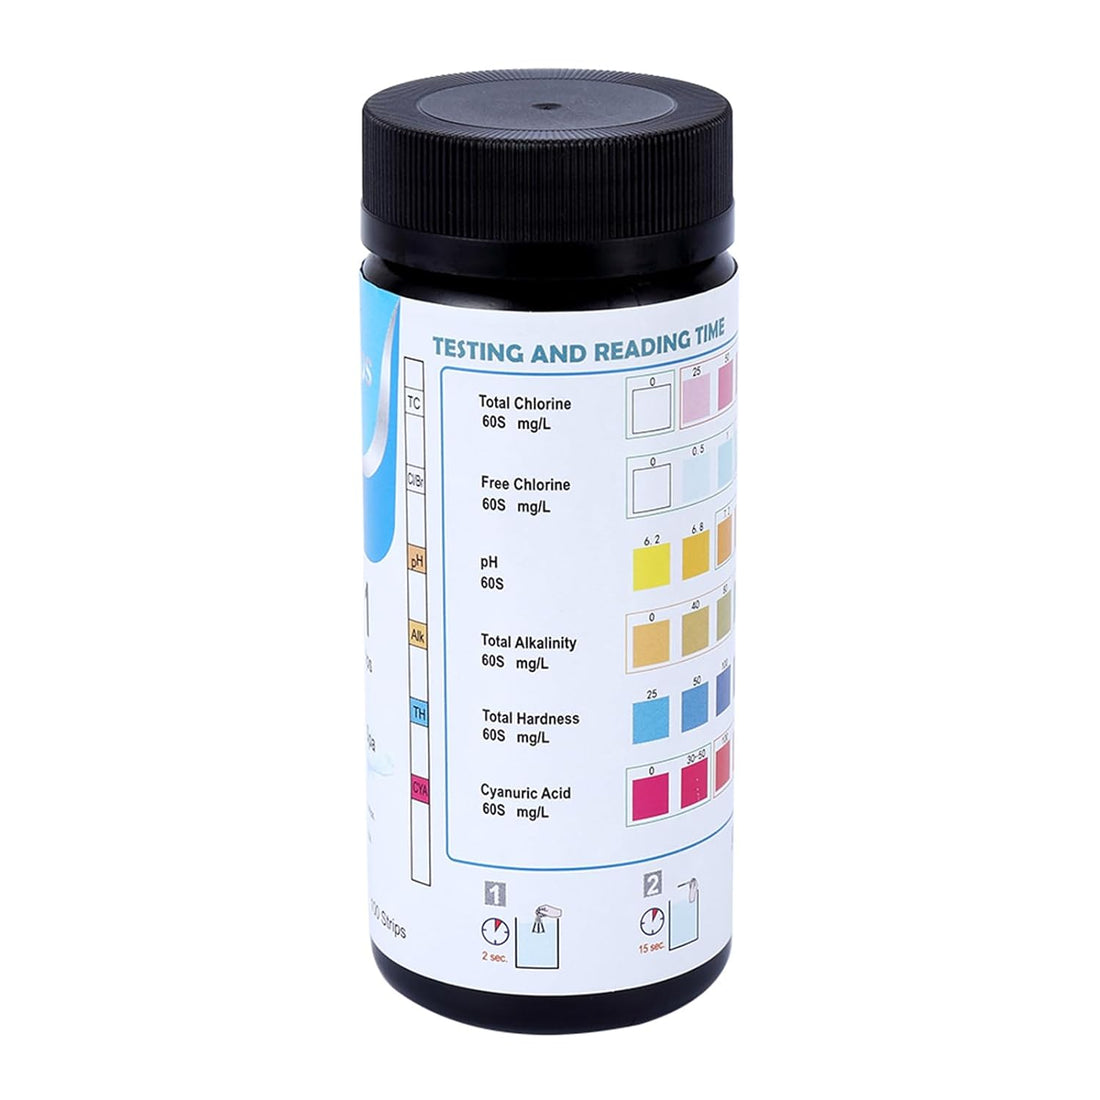 Water Hardness Test Kit, 6-Way Pool Test Strips, 100 Quick & Accurate Pool and Spa Test Strips,Accurate Test Total Alkalinity, pH, Free Chlorine, Total Hardness, Cyanuric Acid, and Total Chlorine